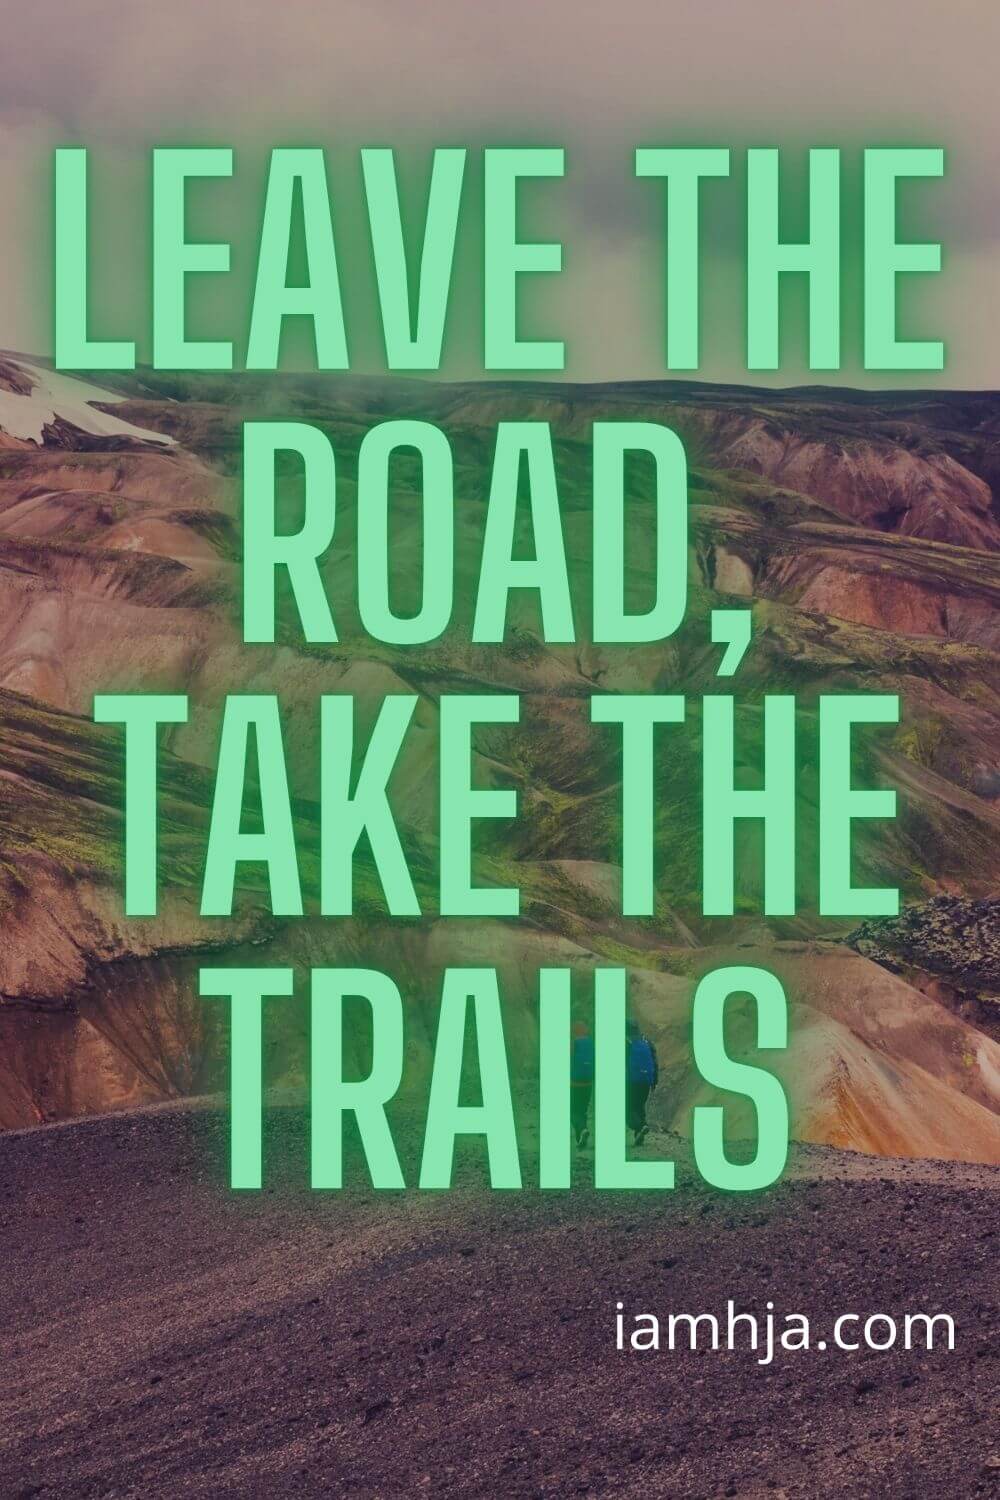 Leave the road, take the trails.